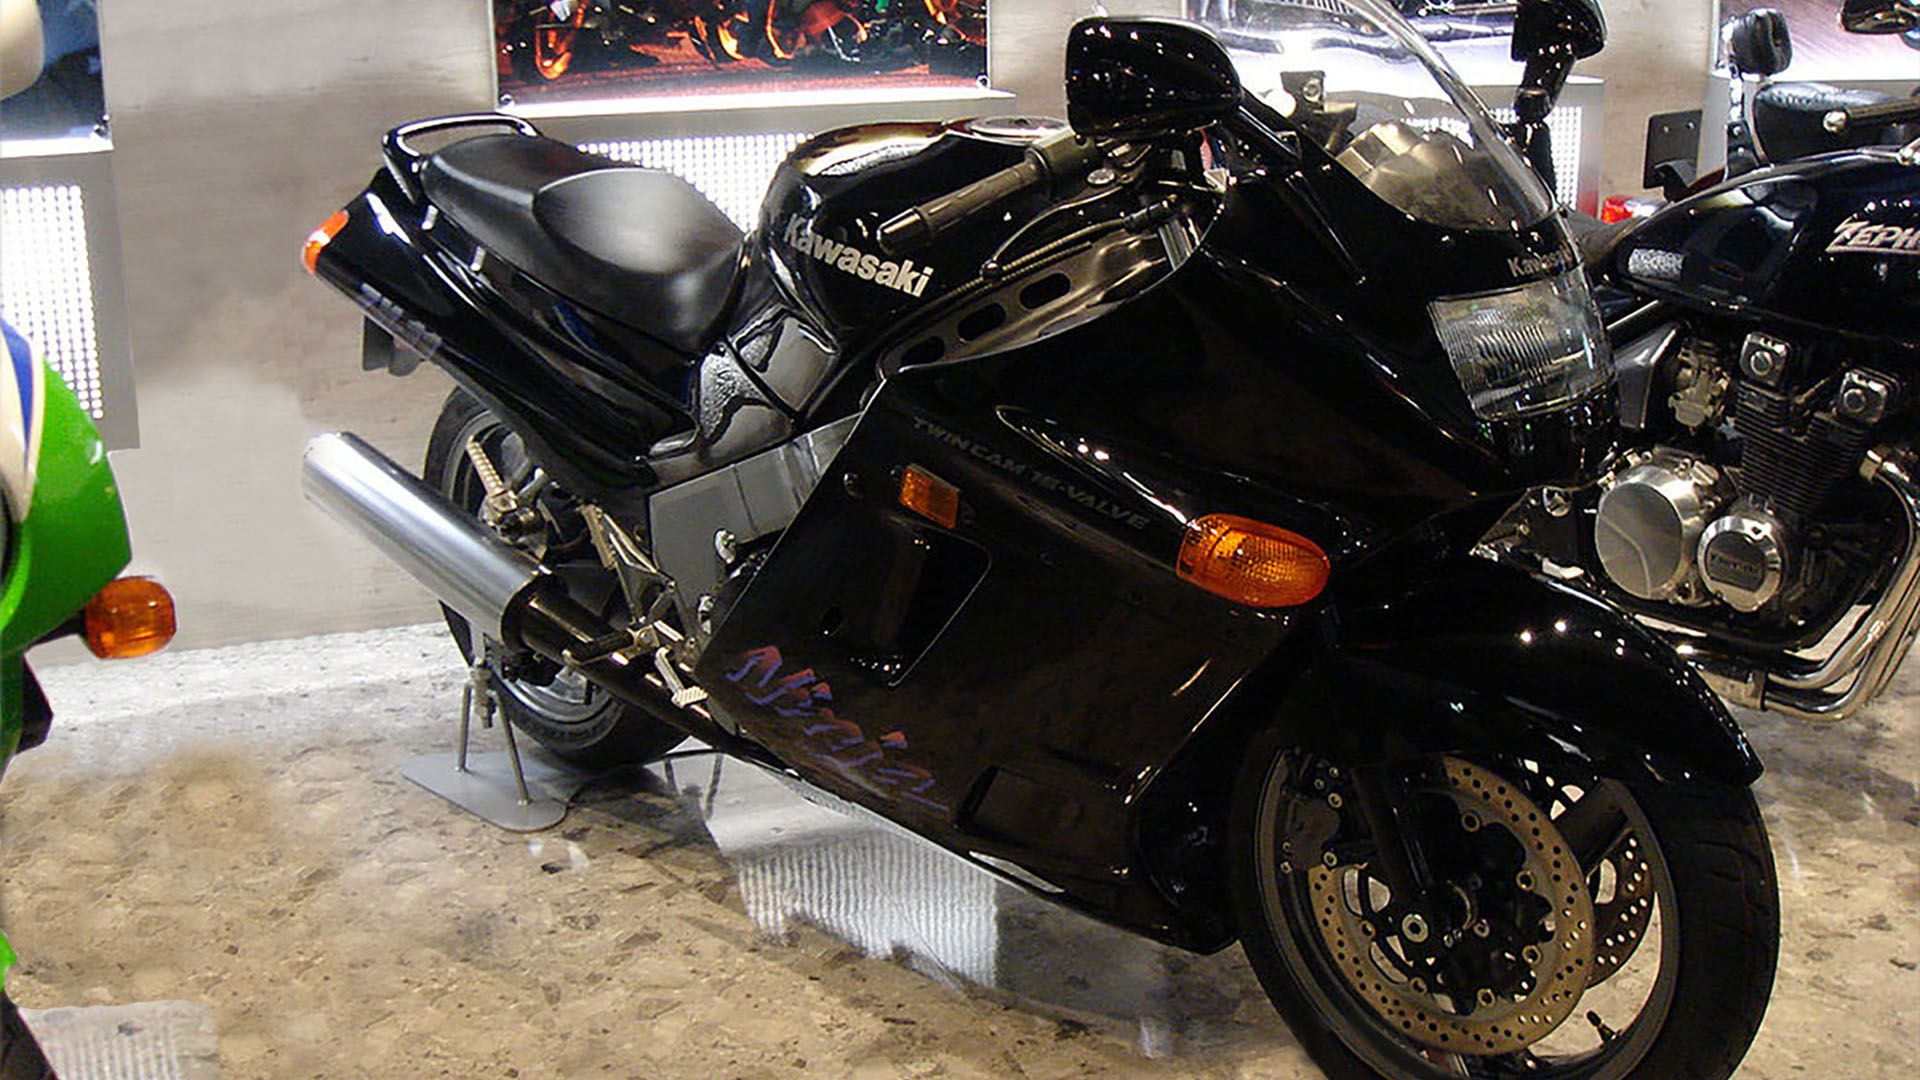 Riding Fast And Flying Low: Mr. Turbo's Kawasaki ZX-11 Turbo